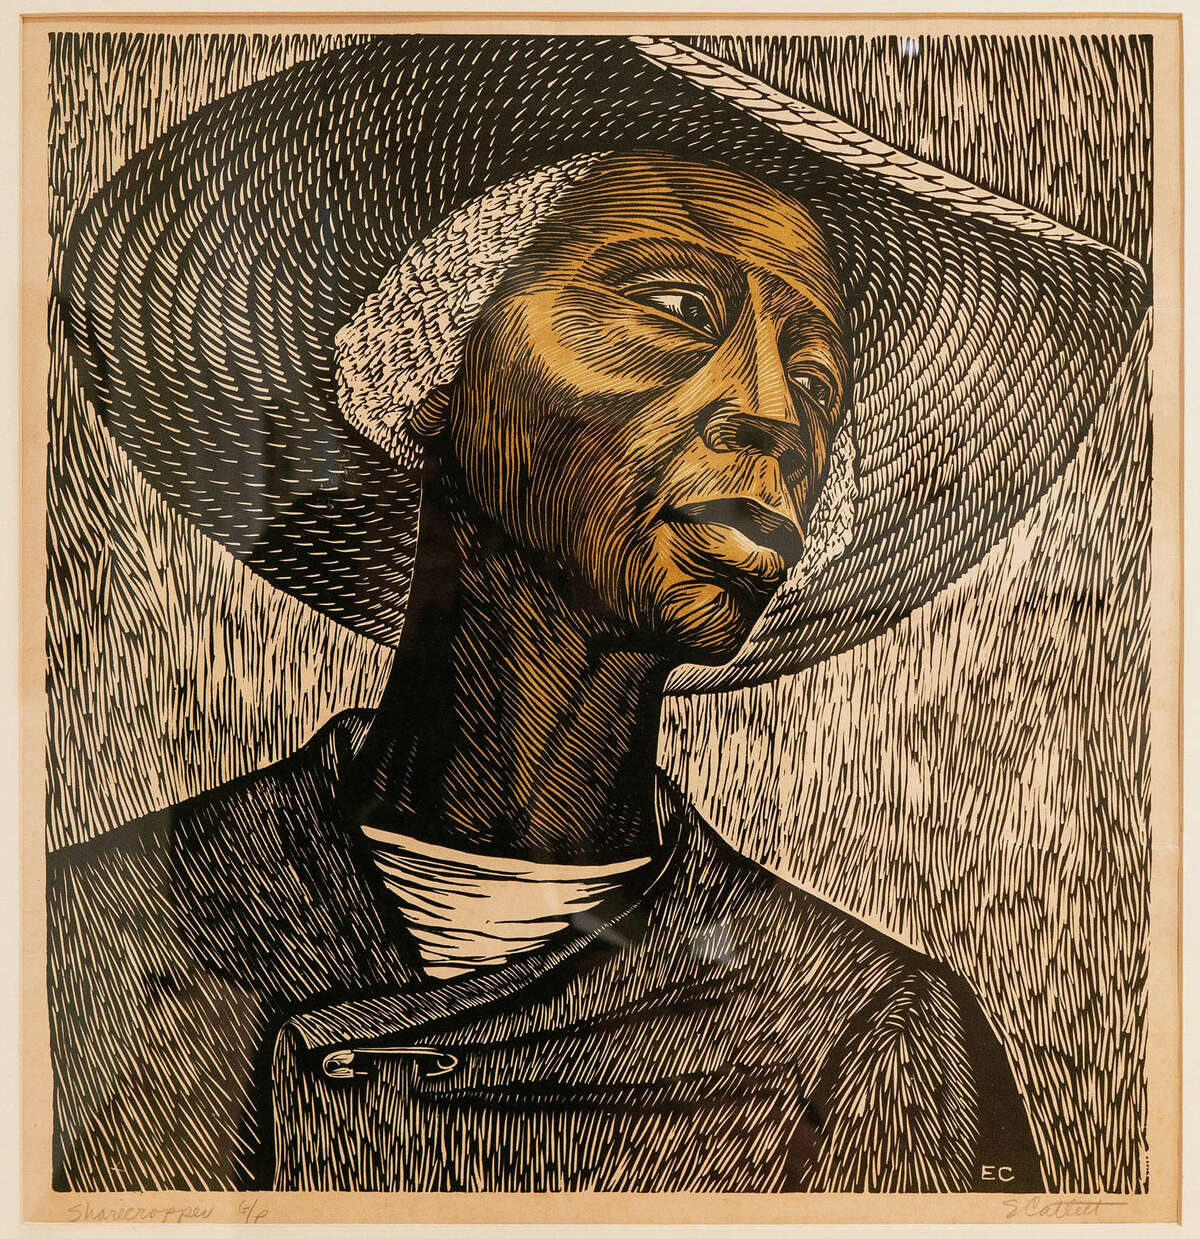 Elizabeth Catlett's "Sharecropper," a 1952 linoleum cut print at the African American Works on Paper exhibit at the Hyde Collection in Glens Falls.